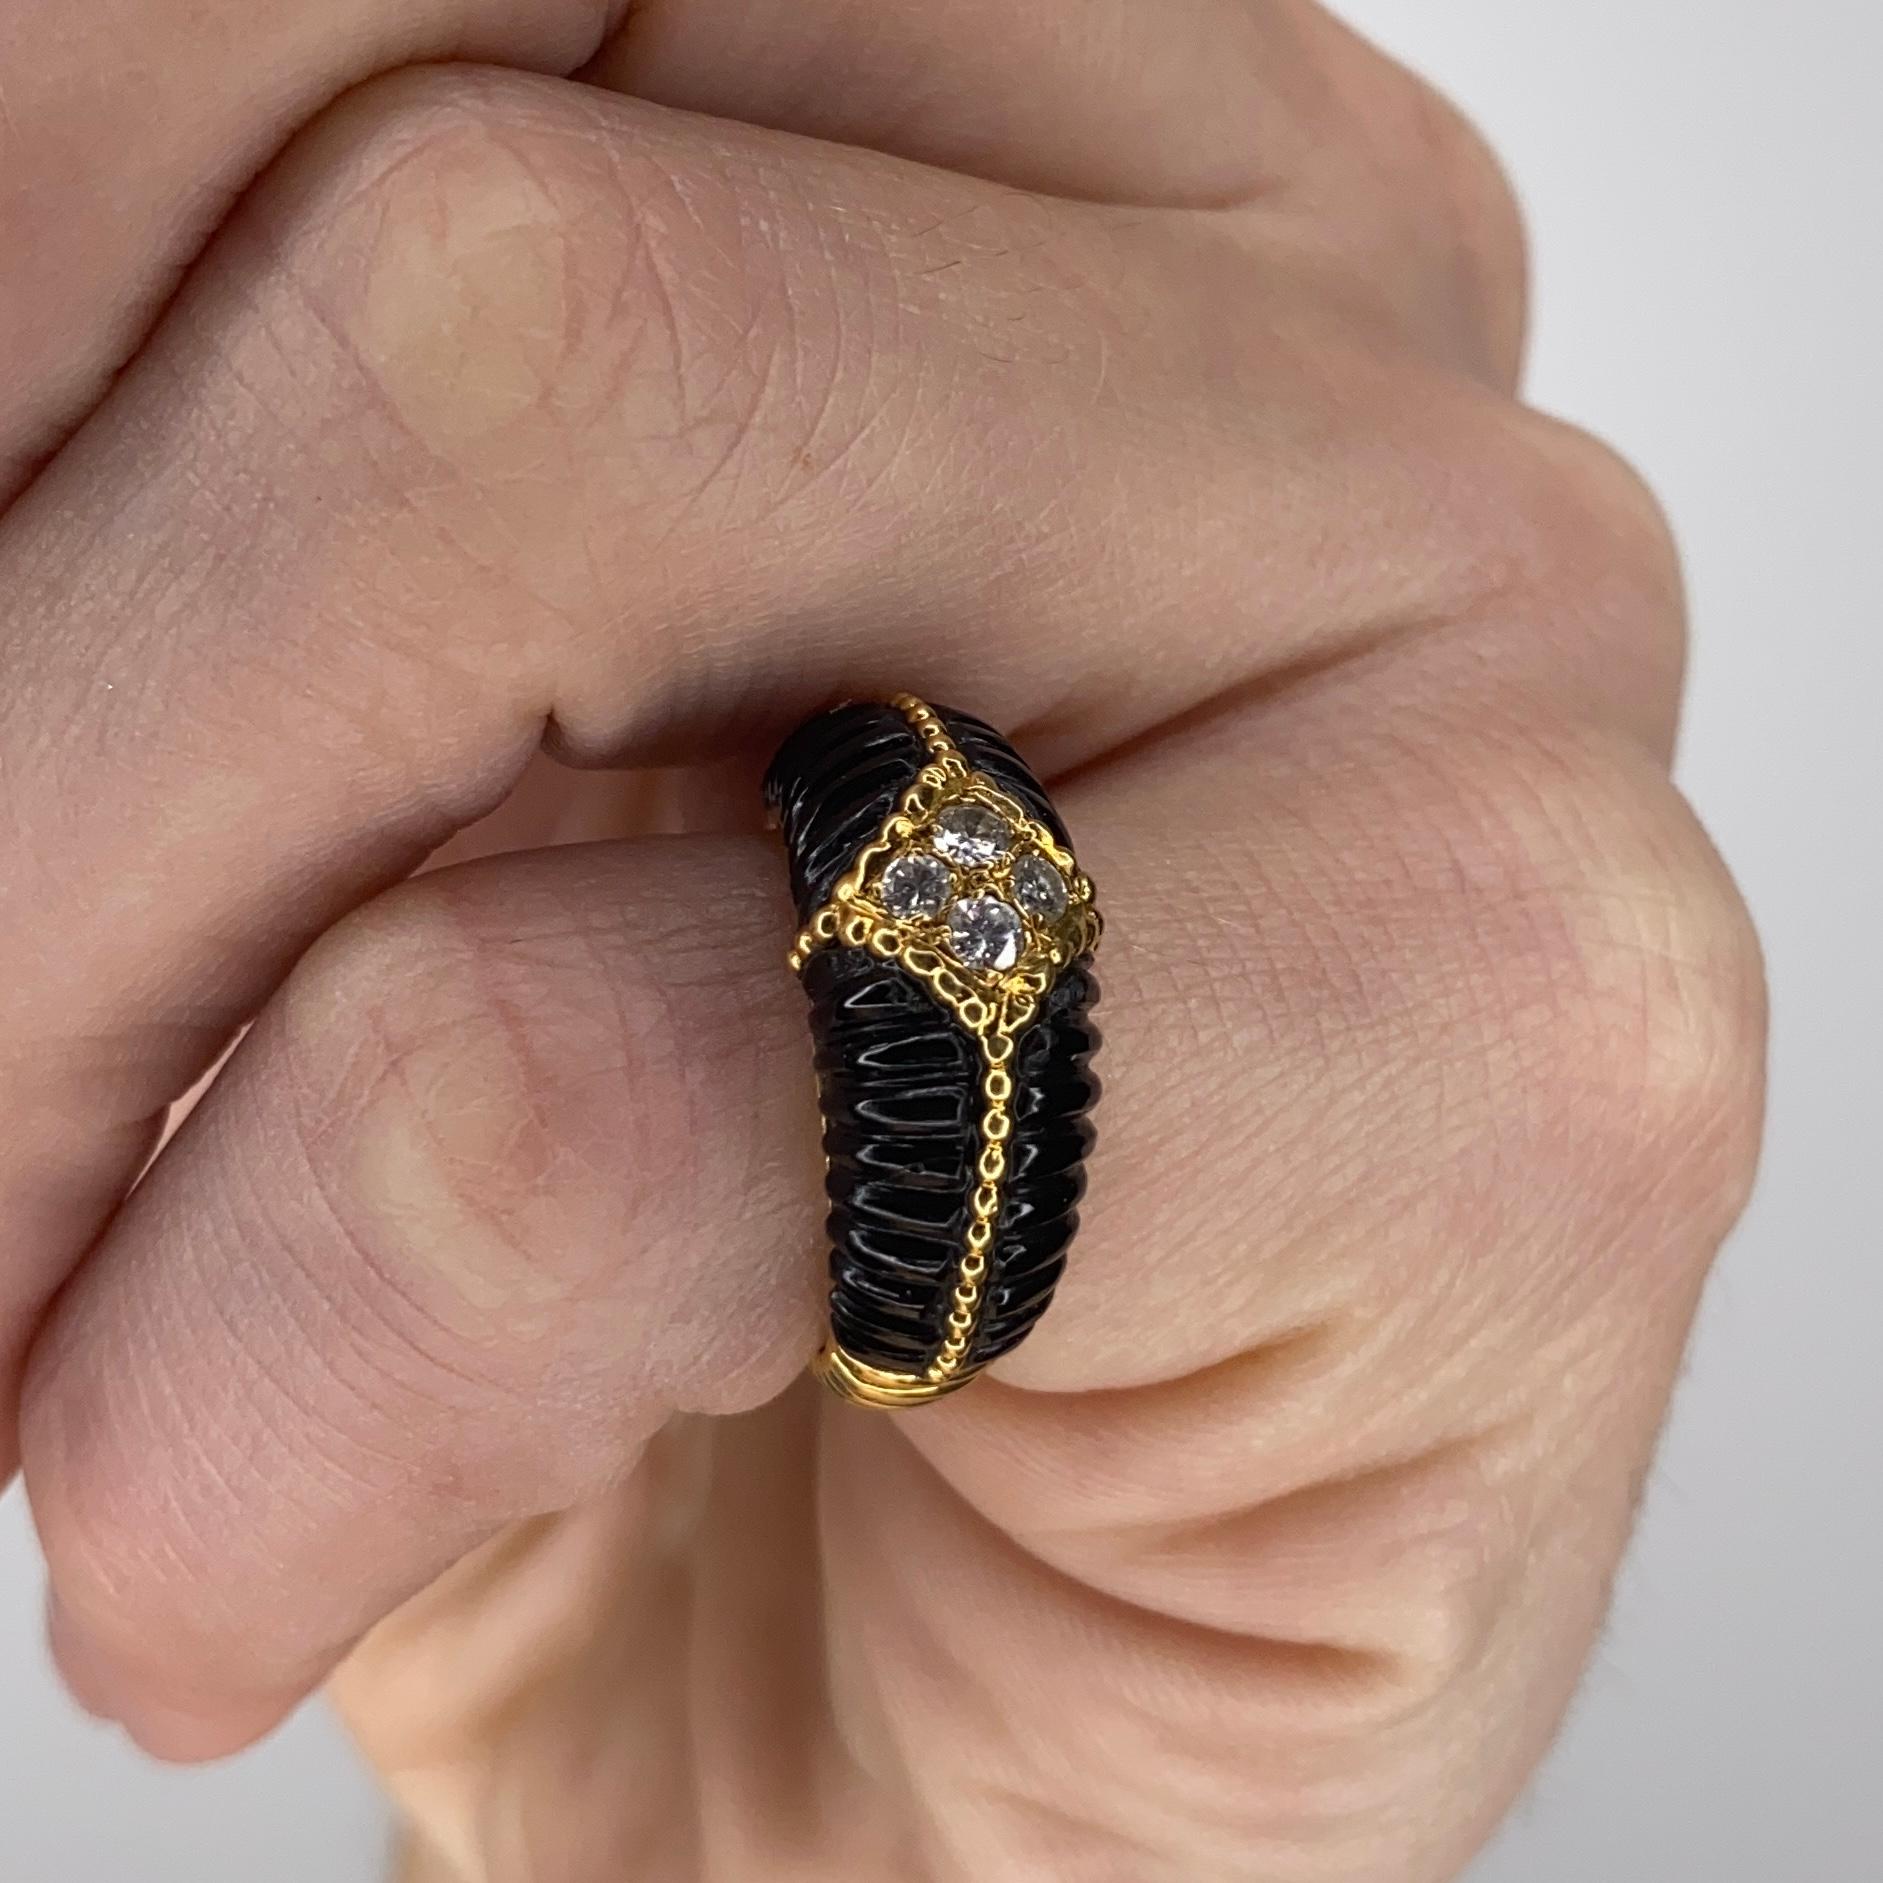 Van Cleef & Arpels 1970 Paris Fluted Onyx Ring in 18Kt Yellow Gold with Diamonds For Sale 1